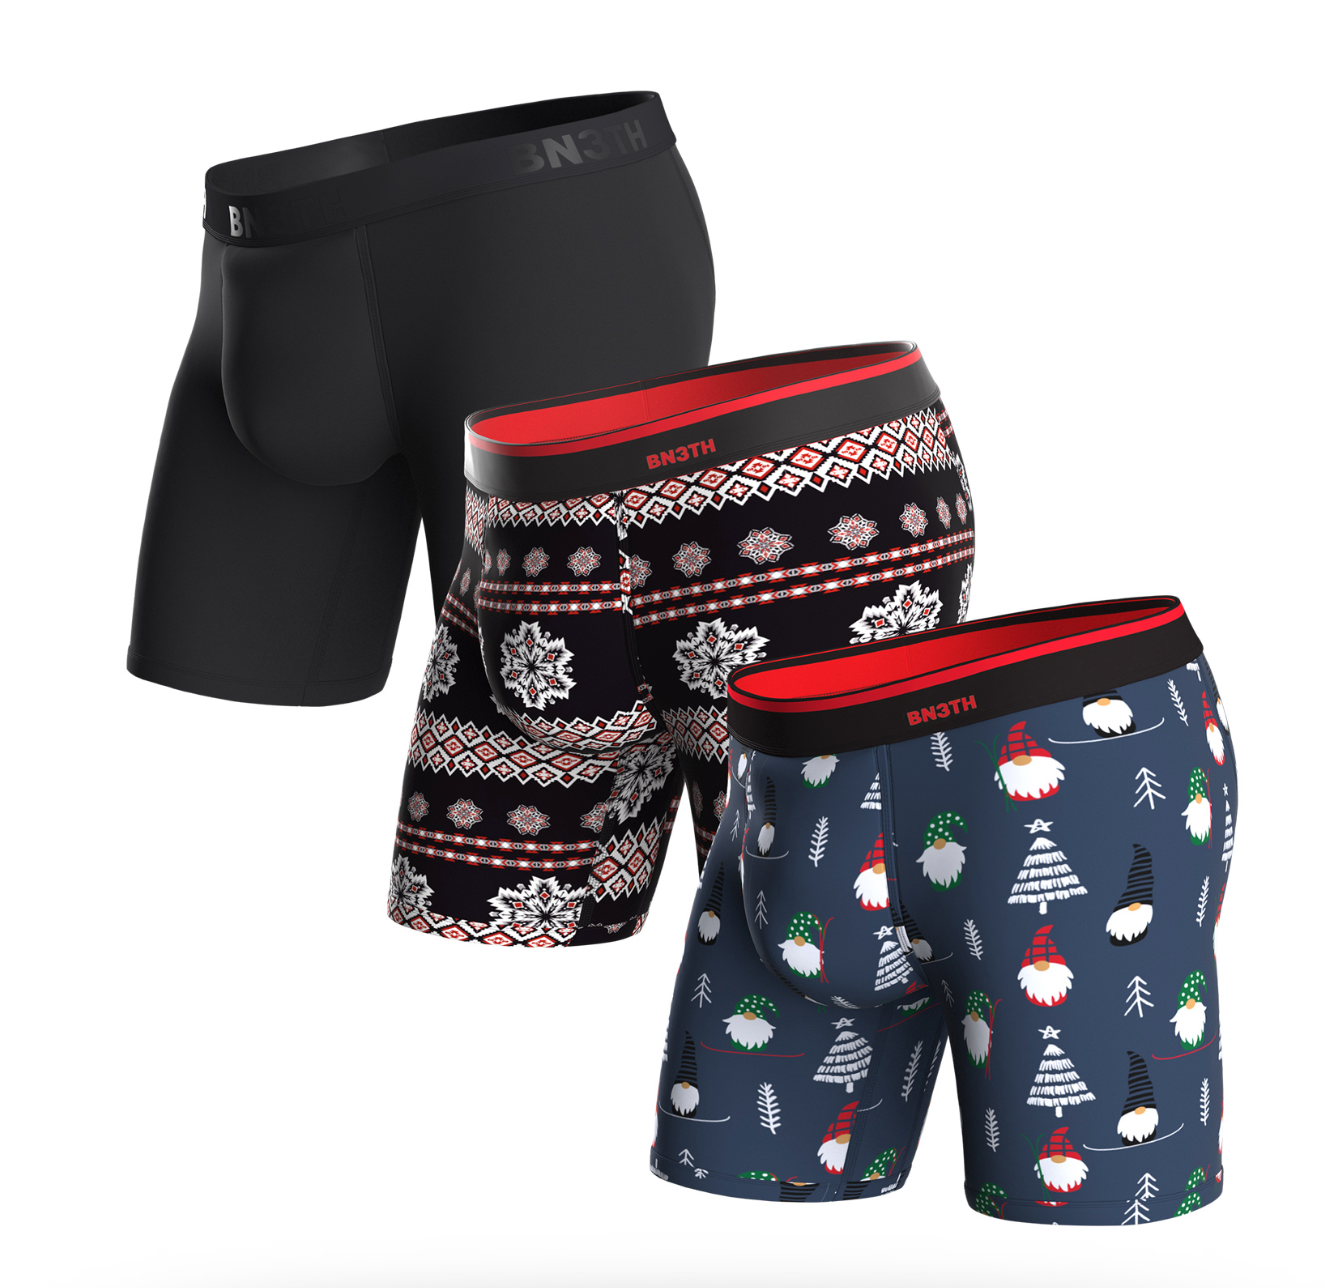 BN3TH Classic 6.5" Boxer Brief 3 Pack - Gnome for the Holidays